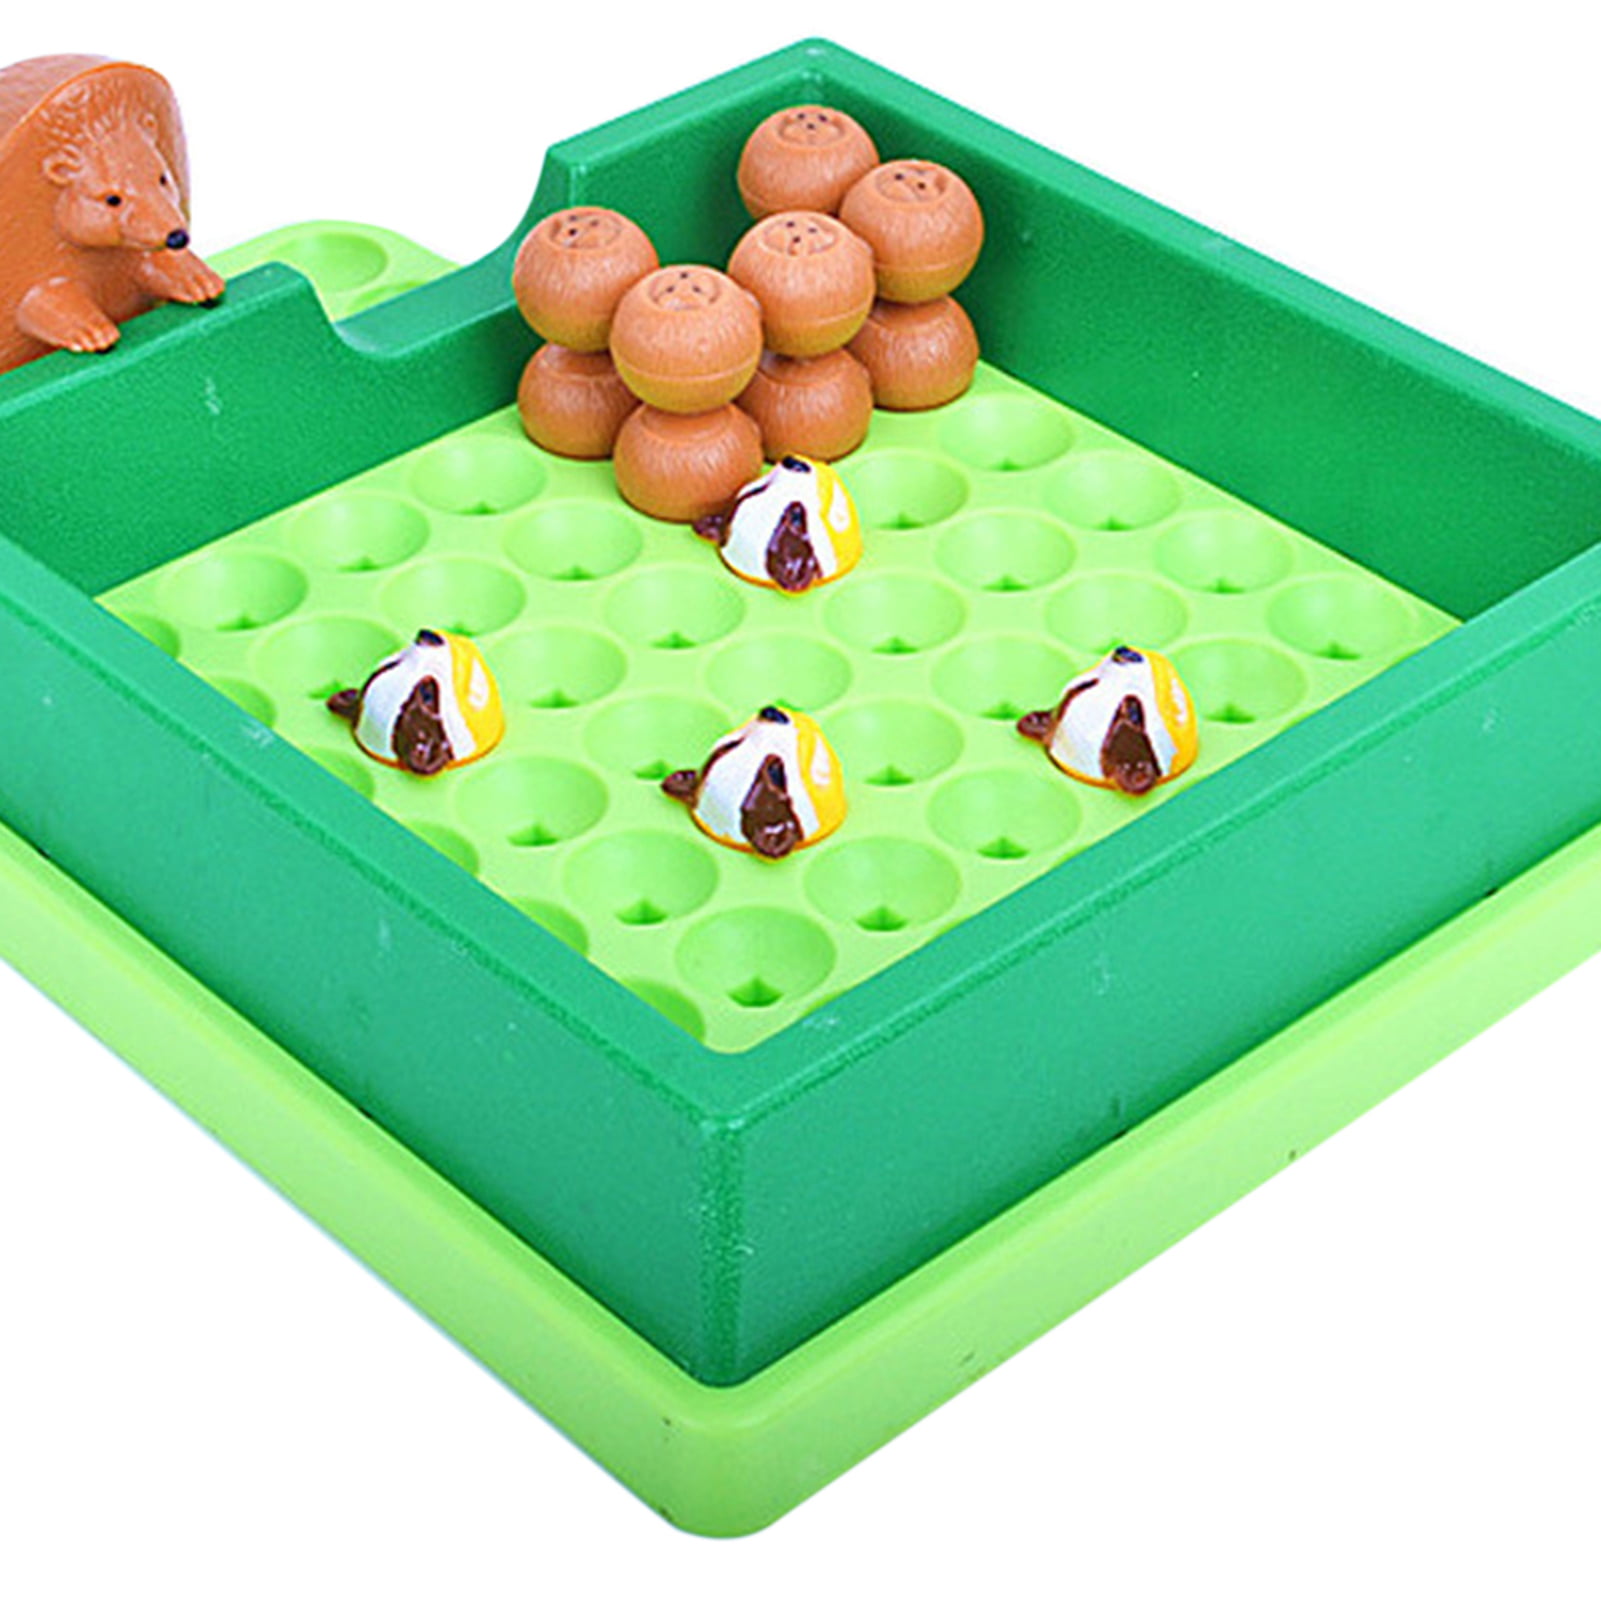 Children Maze Toy Educational Game Interesting Snack Cards Kids Board Games Interactive Super Fun Family Small Table Games Set for Toddlers